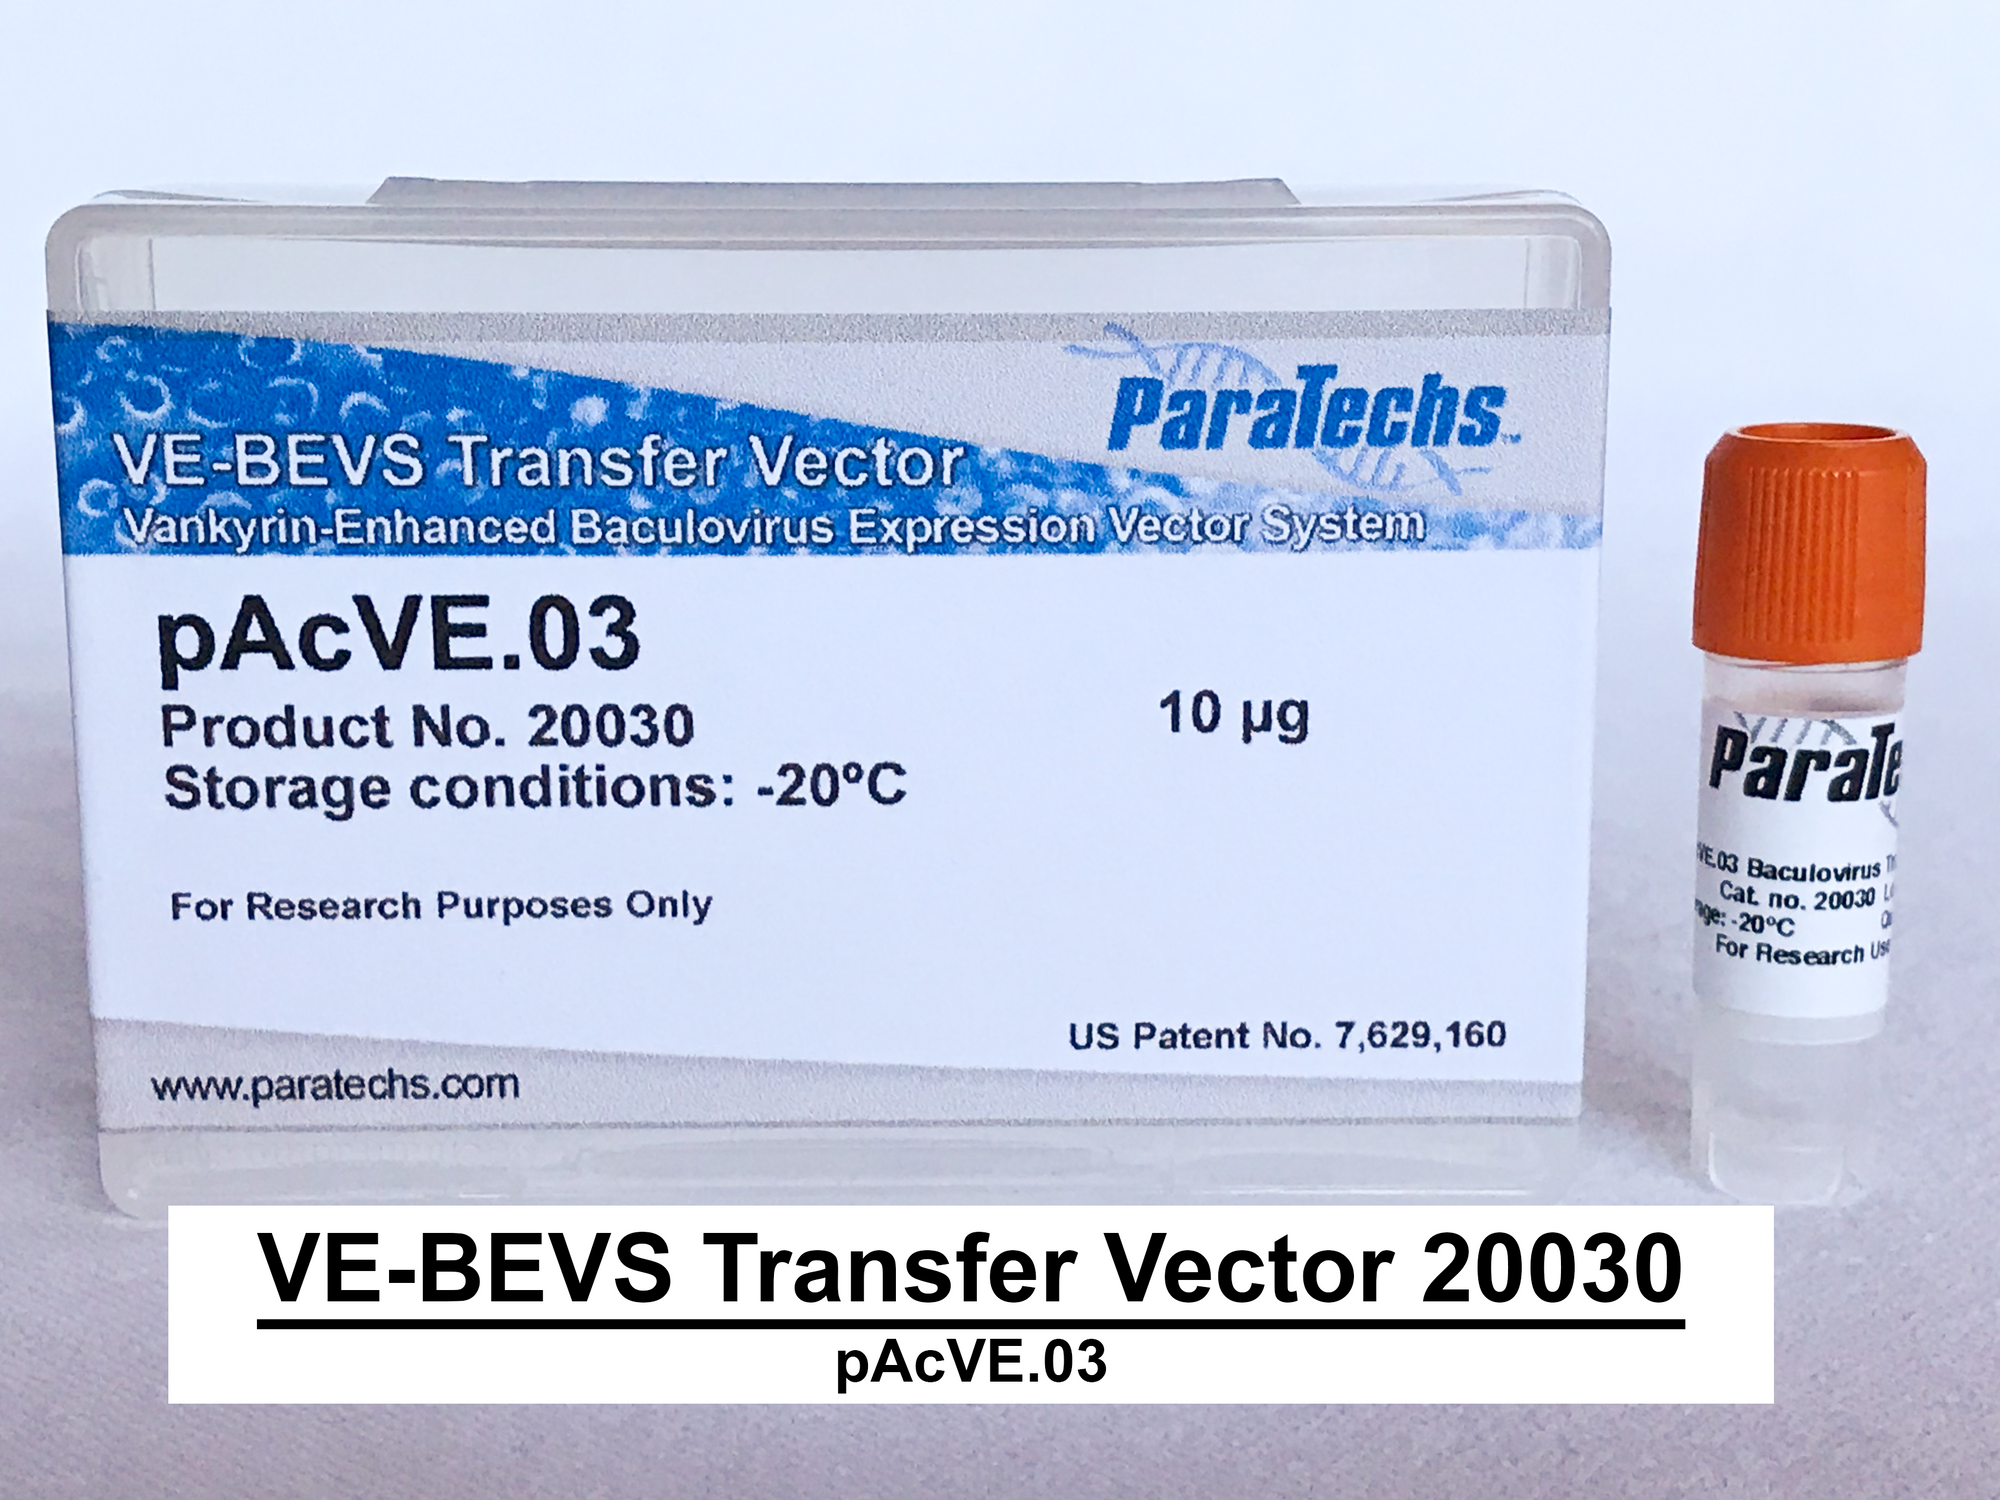 VE-BEVS Transfer Vector 20030 (10 µg) (pAcVE.03) Co-expression of vankyrin gene for increased protein production; HBM signal; C-terminal 6xHis-tag.